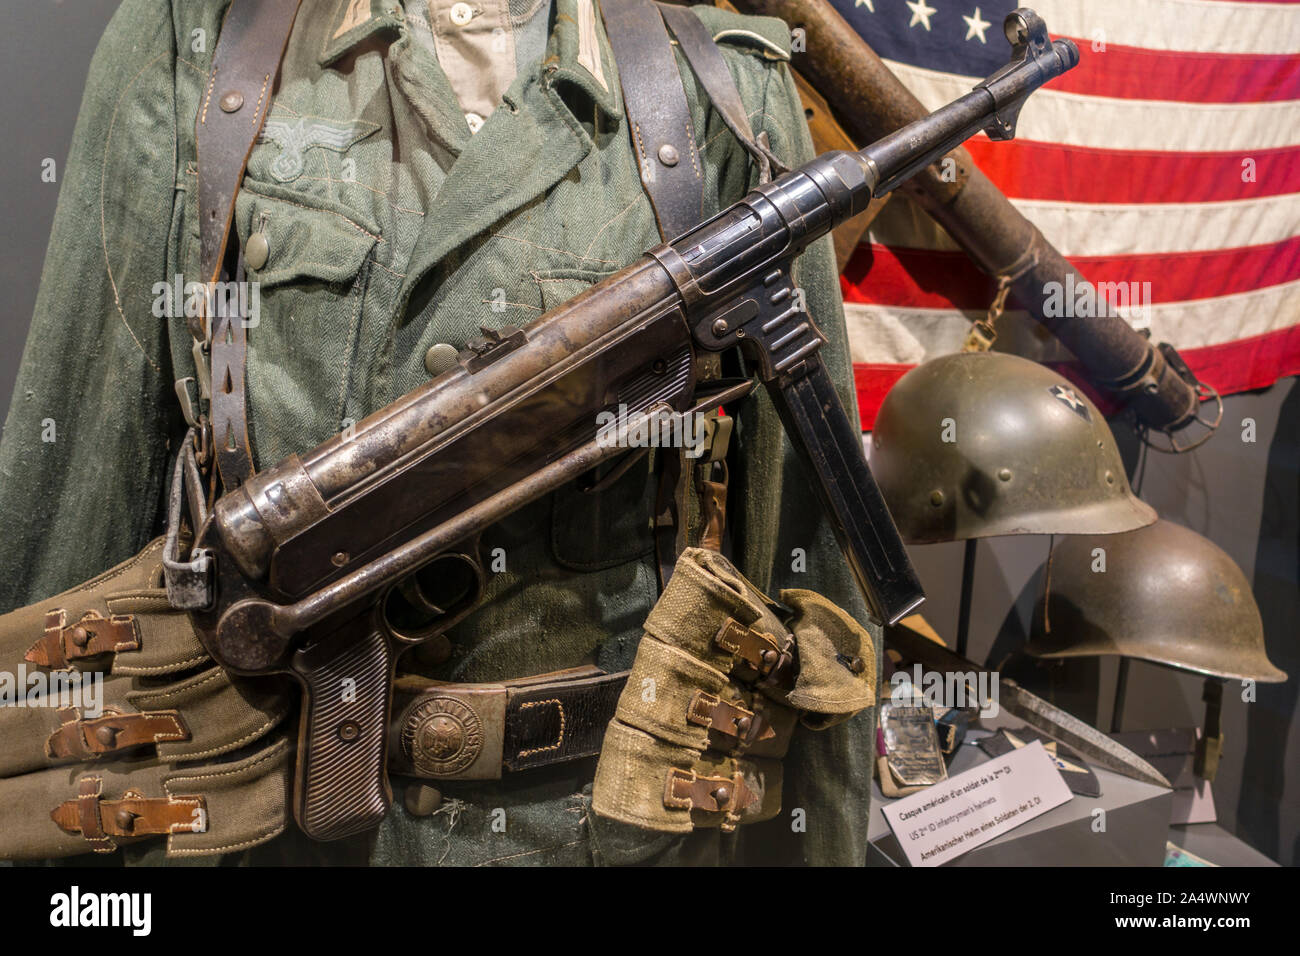 German soldier armed with MP 40 submachine gun in the Musée Mémoire 39-45, WW2 museum in Plougonvelin, Finistère, Brittany, France Stock Photo